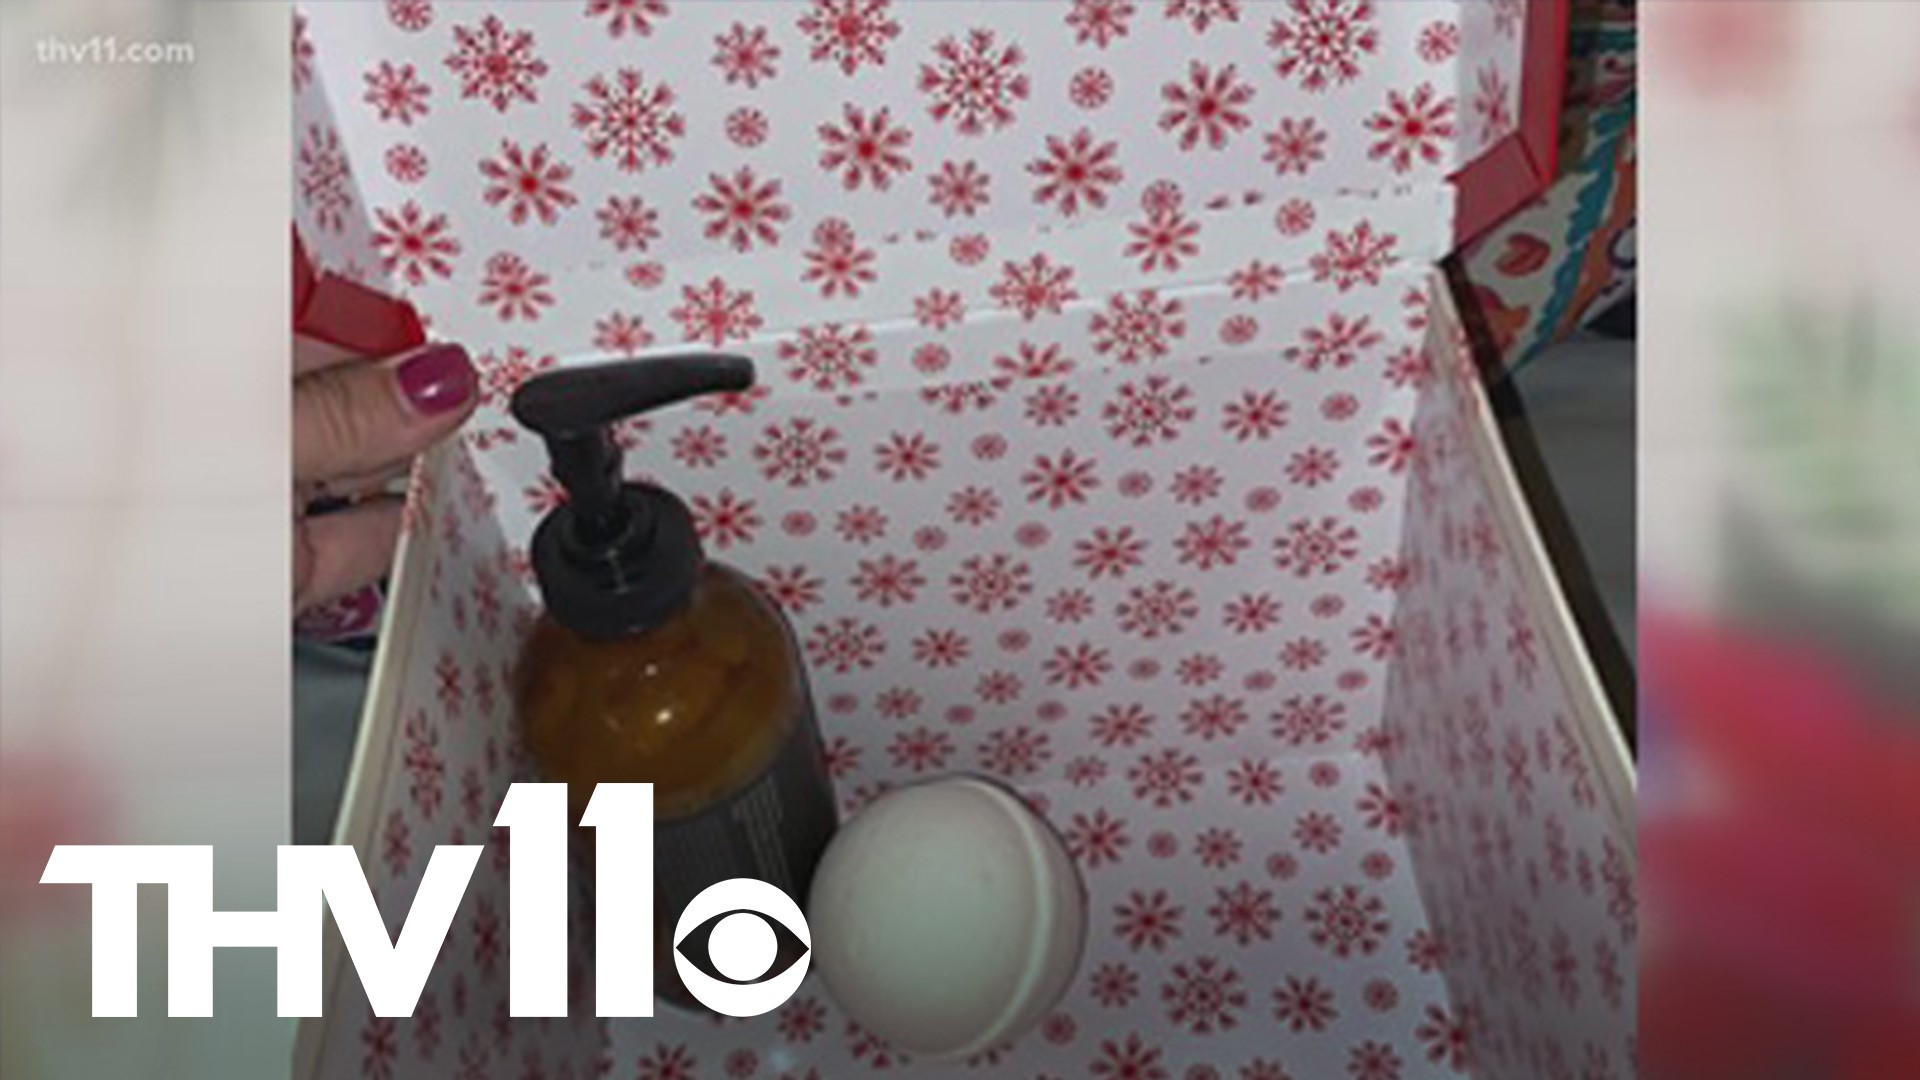 This holiday season, Arkansans are finding themselves thankful for the unusual, whether that be people or things.